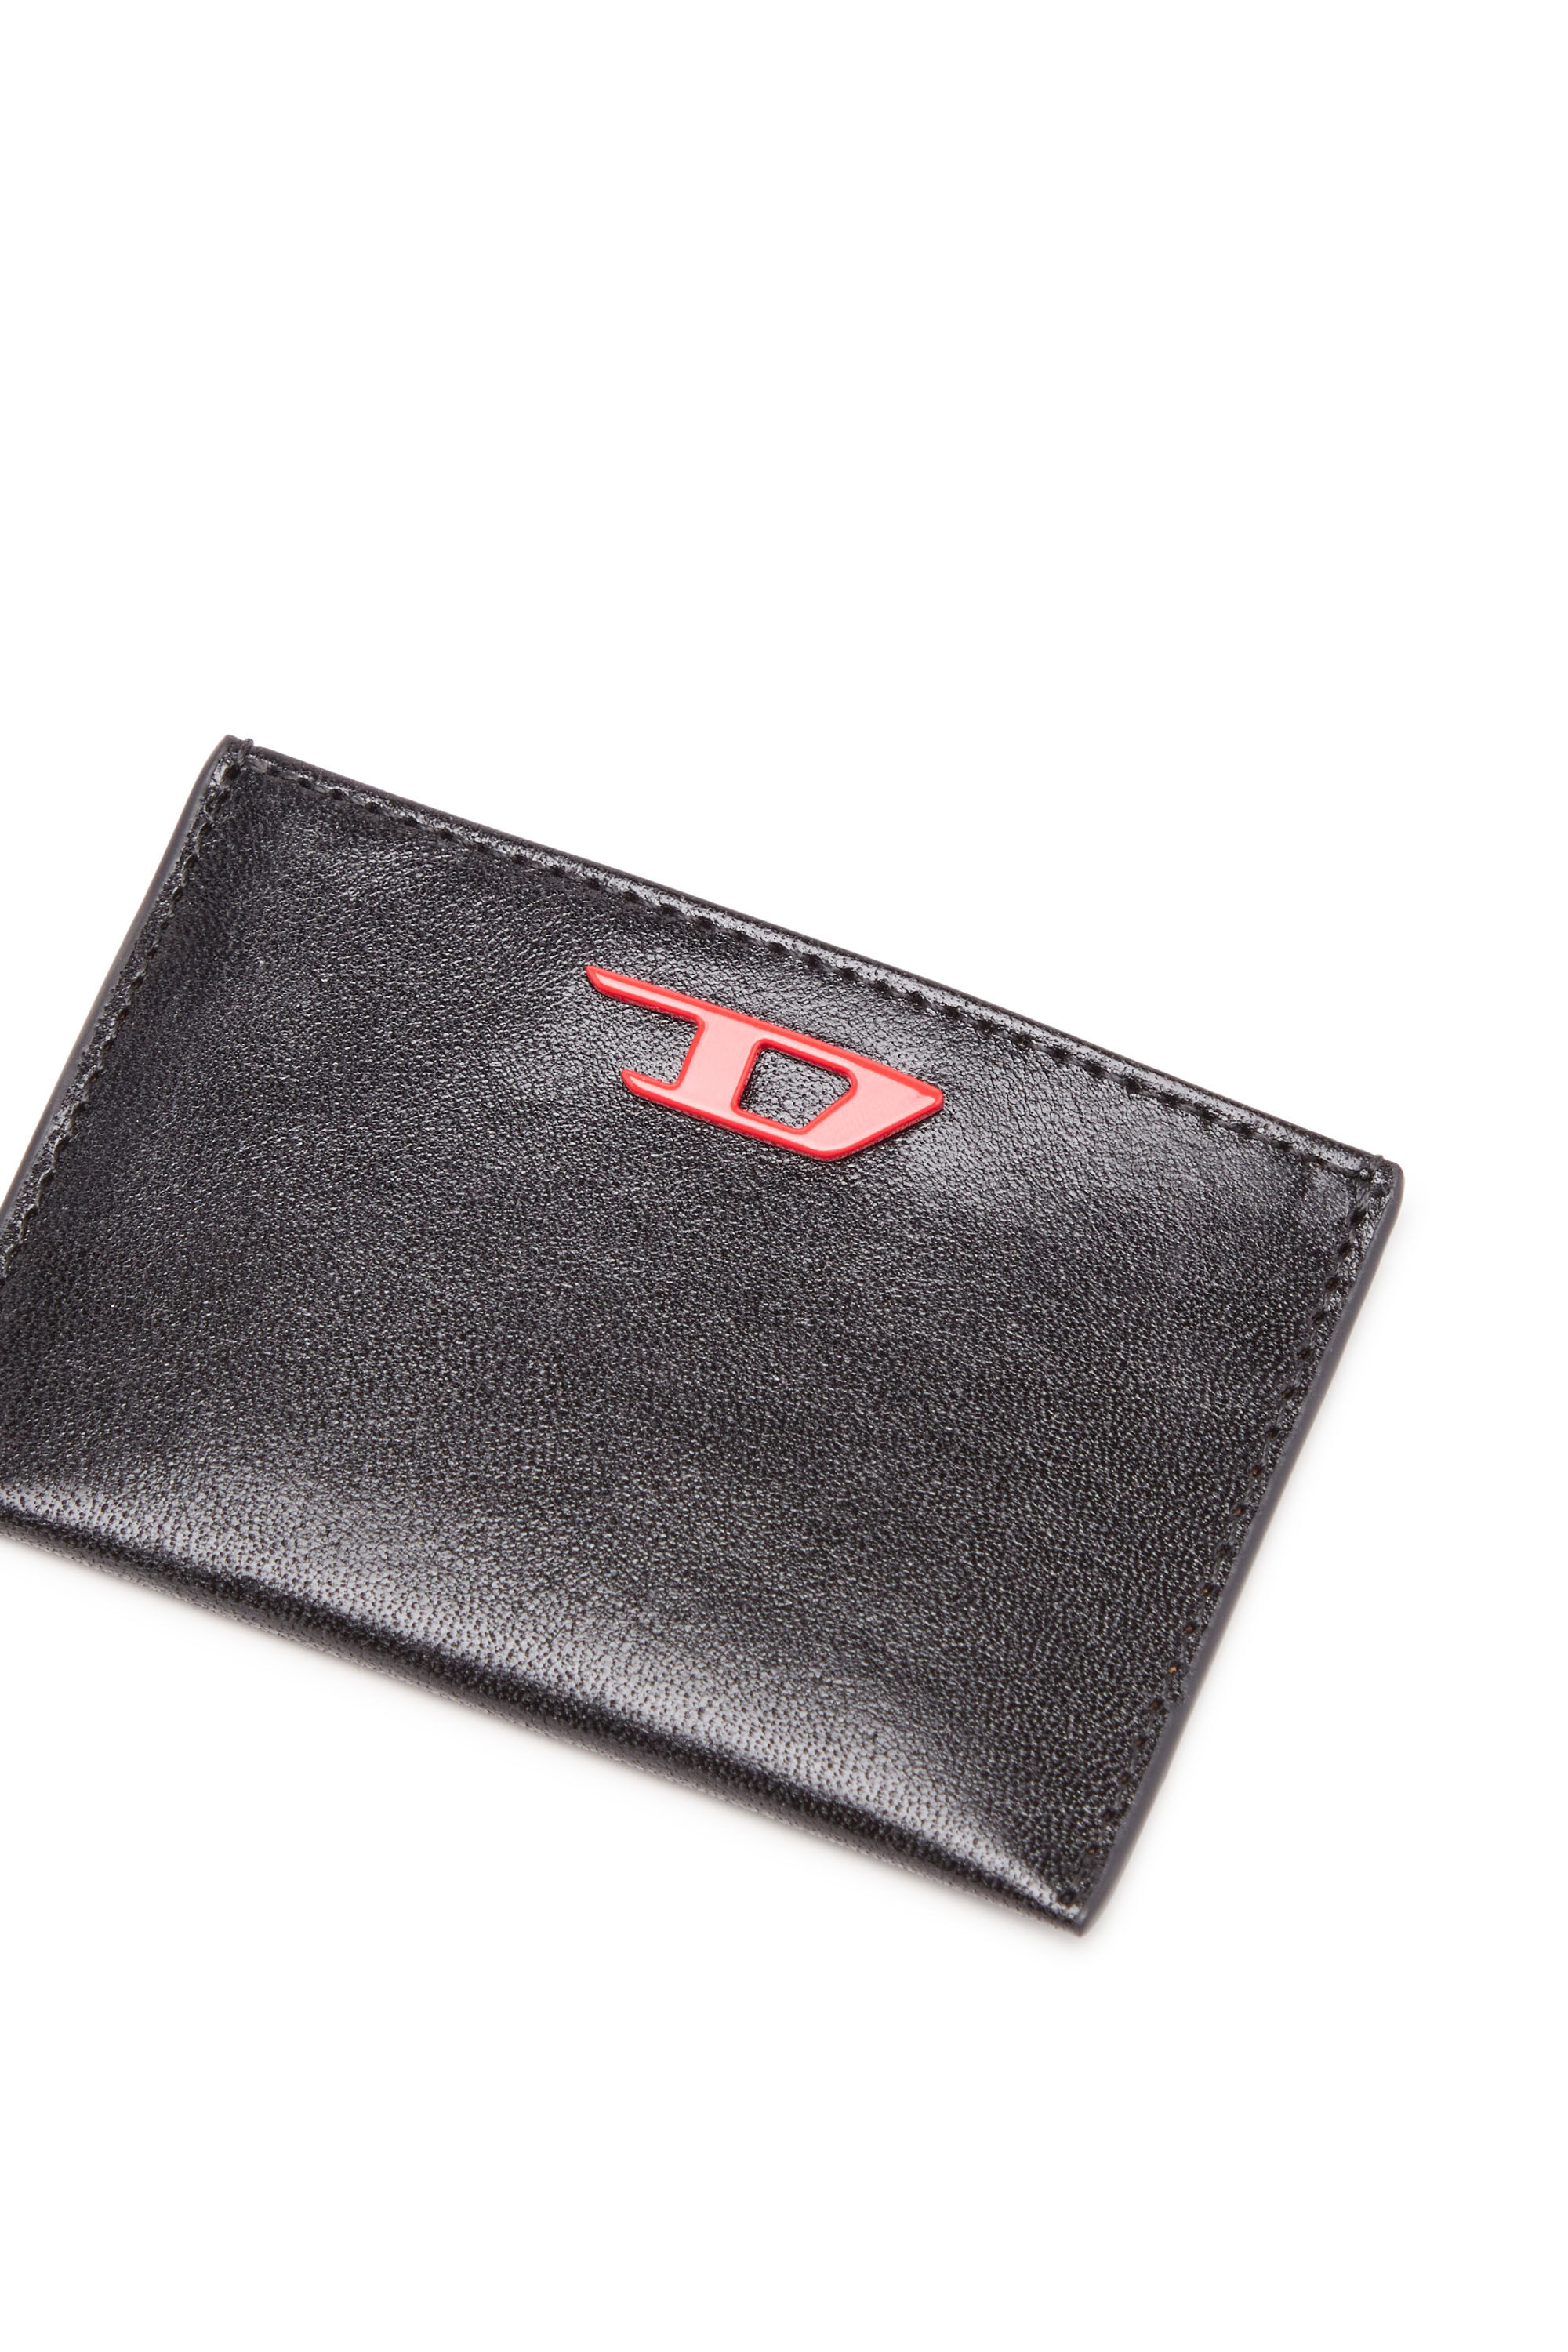 Diesel - RAVE CARD CASE, Man Leather card holder with red D plaque in Black - Image 4